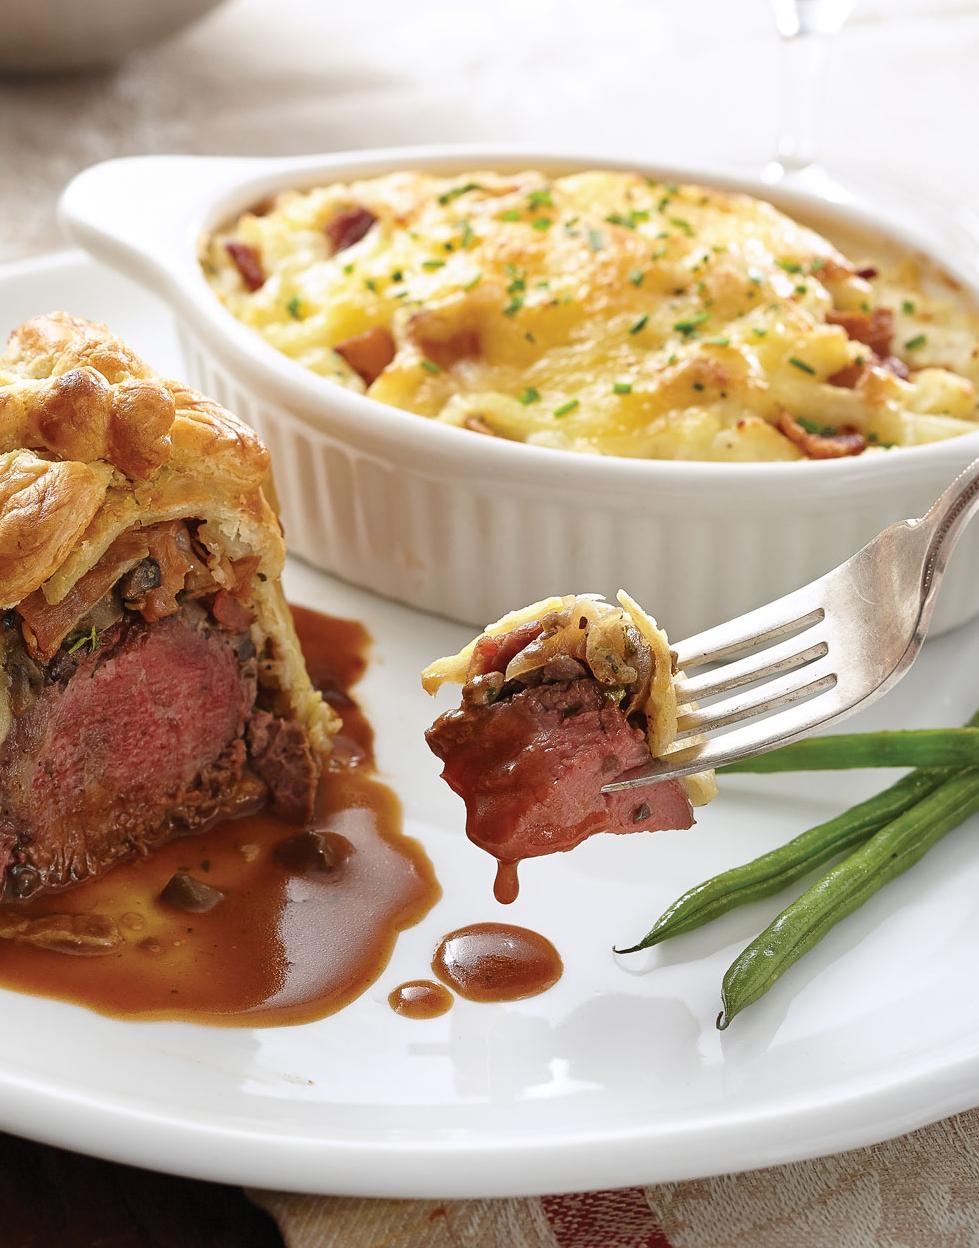  This beef and port wine love affair will make your taste buds sing.